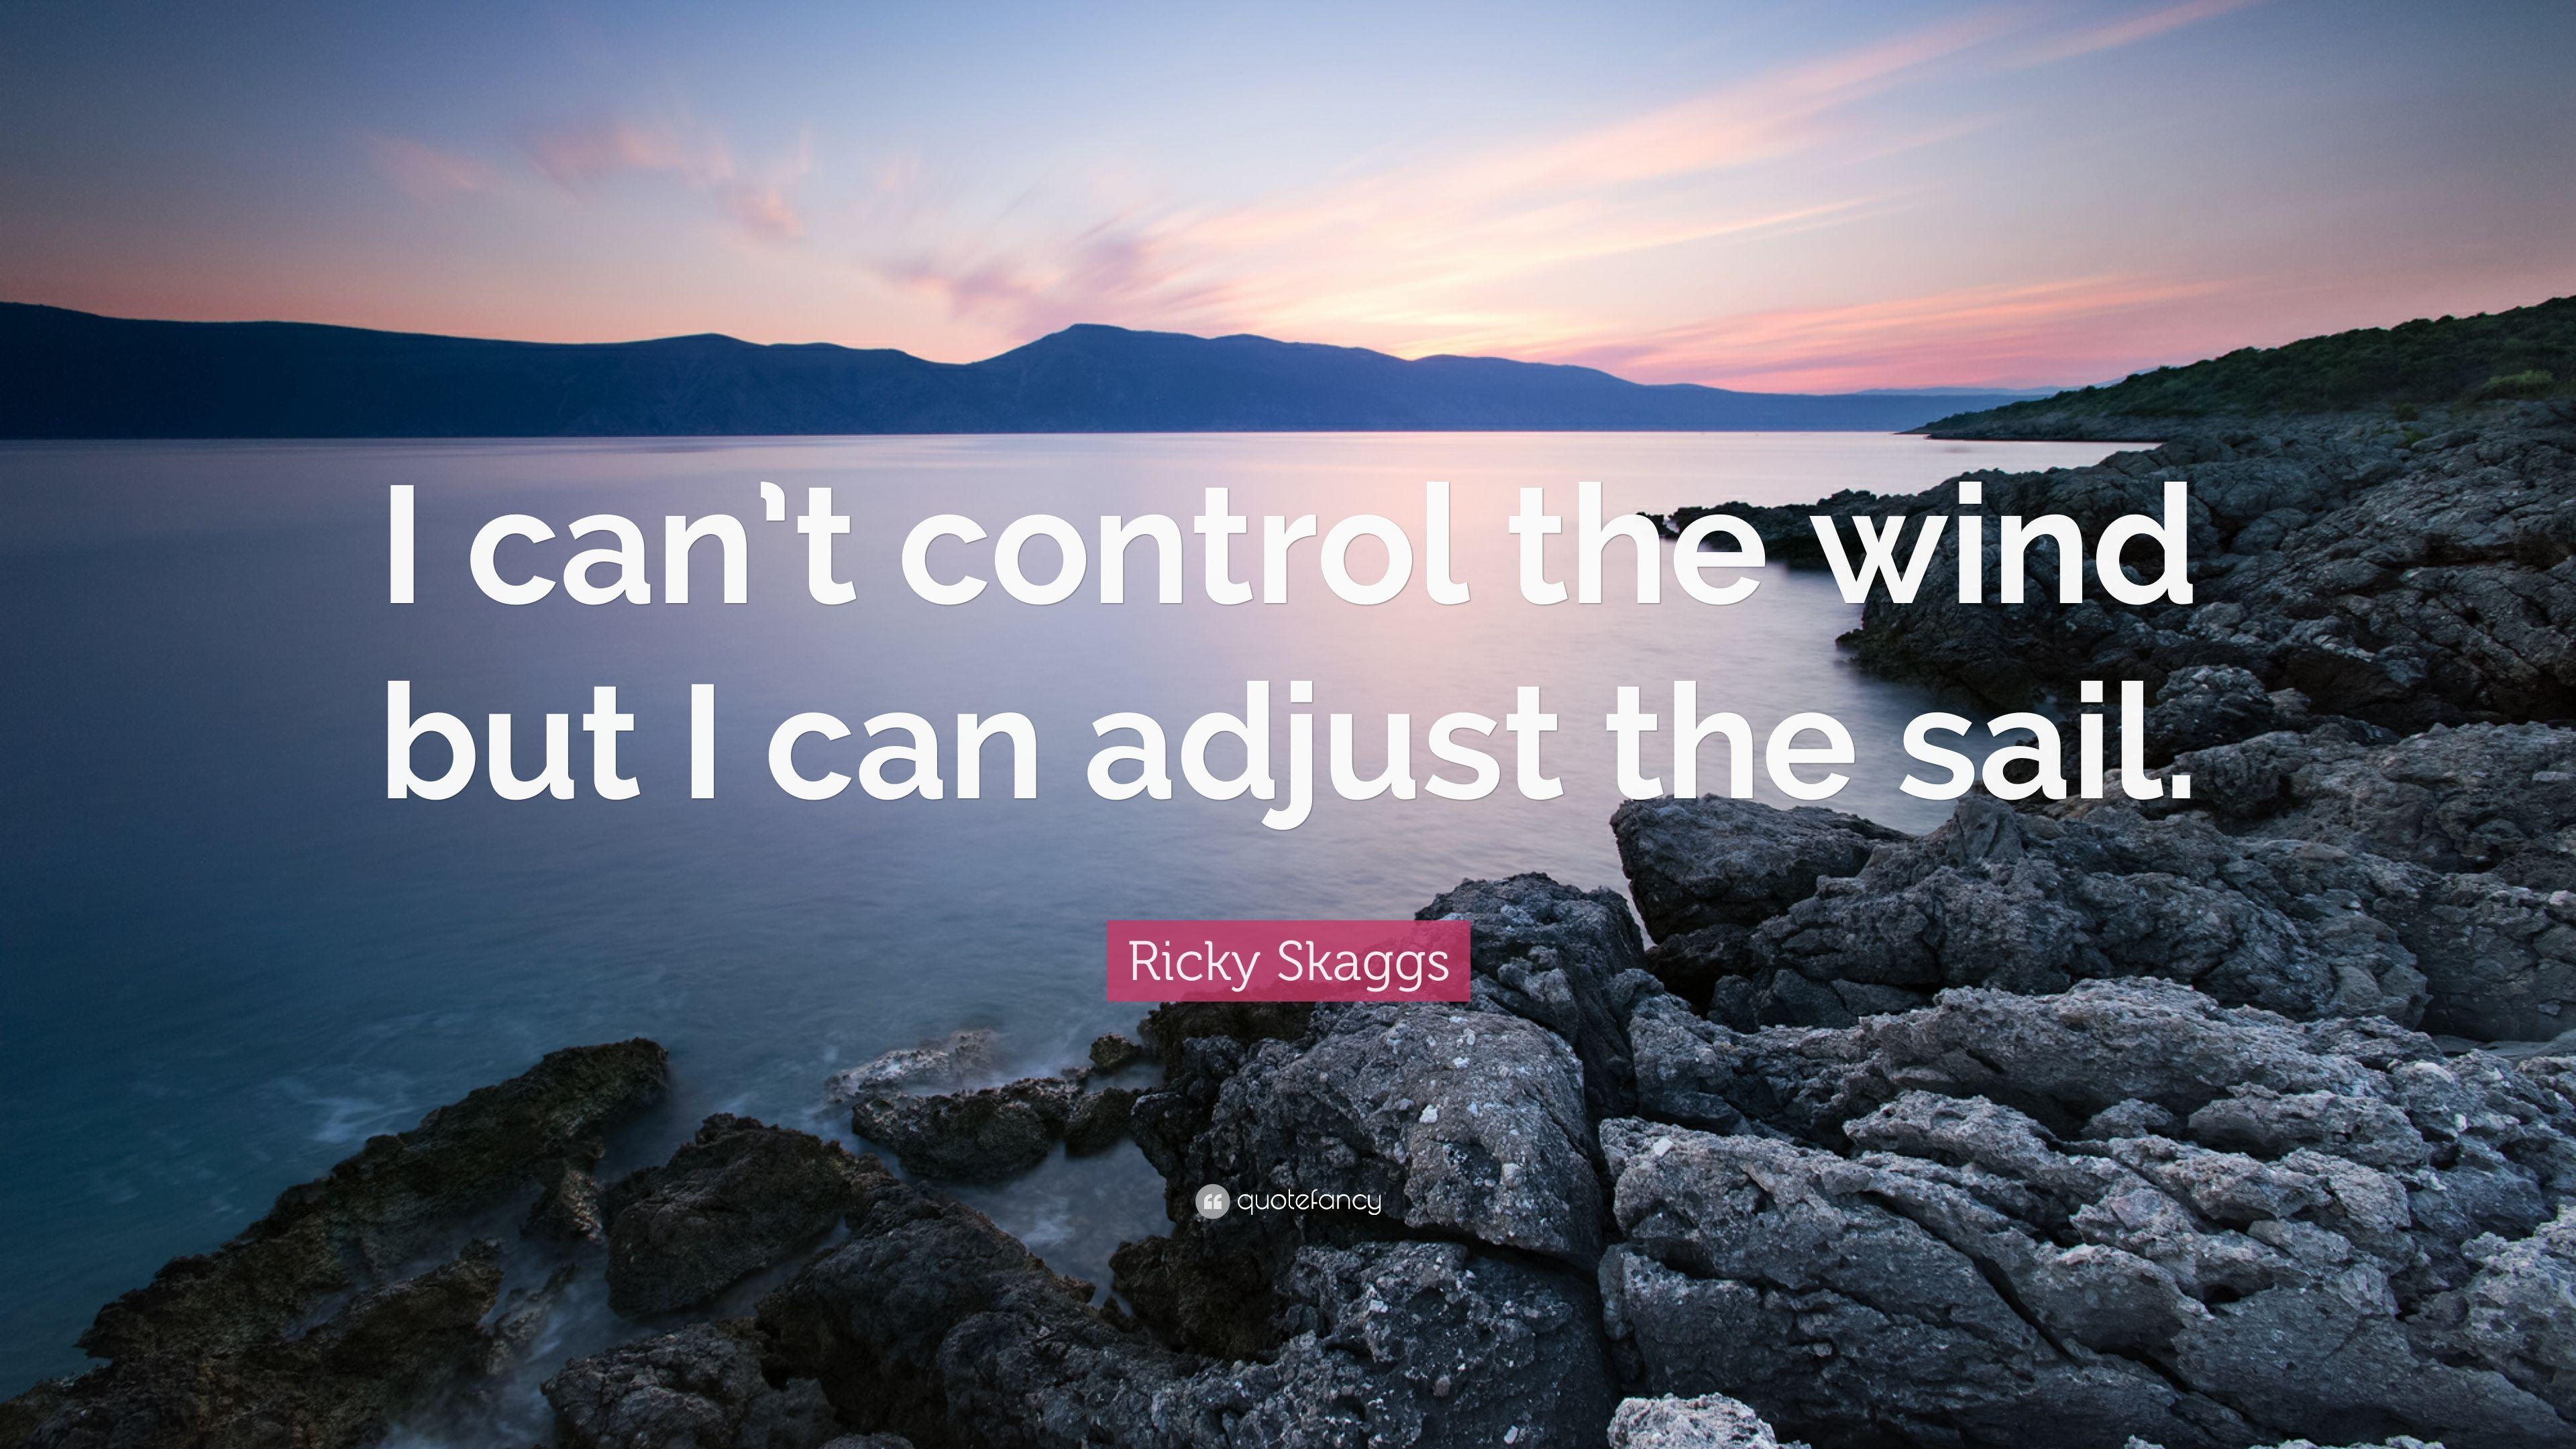 Ricky Skaggs Quotes (28 wallpaper)